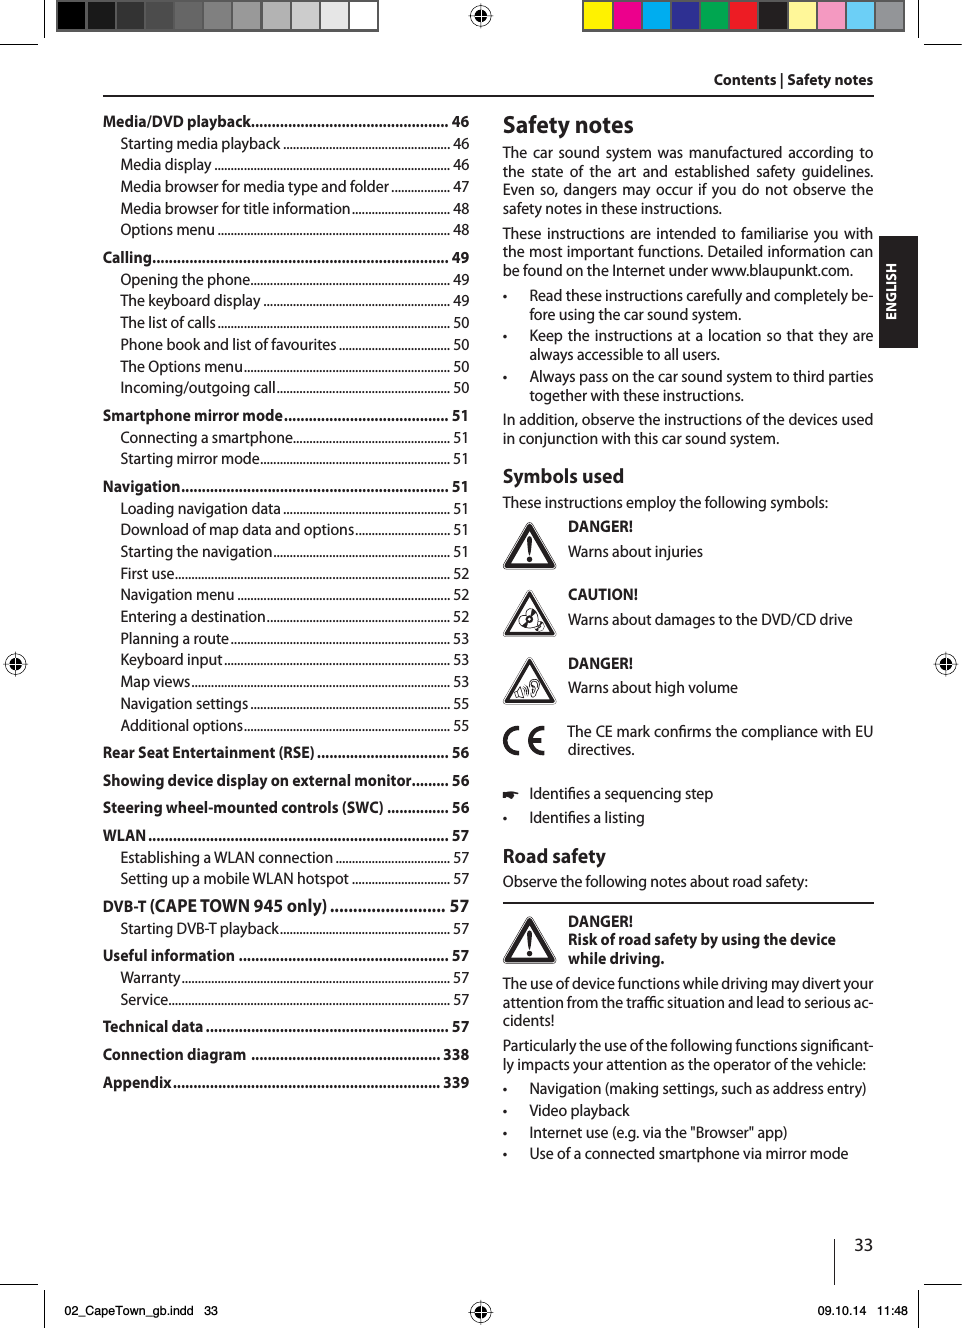 33ENGLISHContents | Safety notesSafety notesThe car sound system was manufactured according to the state of the art and established safety guidelines. Even so, dangers may occur if you do not observe the safety notes in these instructions.These instructions are intended to familiarise you with the most important functions. Detailed information can be found on the Internet under www.blaupunkt.com.tRead these instructions carefully and completely be-fore using the car sound system.tKeep the instructions at a location so that they are always accessible to all users.tAlways pass on the car sound system to third parties together with these instructions.In addition, observe the instructions of the devices used in conjunction with this car sound system.Symbols usedThese instructions employ the following symbols:DANGER!Warns about injuriesCAUTION!Warns about damages to the DVD/CD driveDANGER!Warns about high volumeThe CE mark conrms the compliance with EU directives.쏅Identies a sequencing steptIdenties a listingRoad safetyObserve the following notes about road safety:DANGER!Risk of road safety by using the device while driving. The use of device functions while driving may divert your attention from the trac situation and lead to serious ac-cidents!Particularly the use of the following functions signicant-ly impacts your attention as the operator of the vehicle:tNavigation (making settings, such as address entry)tVideo playbacktInternet use (e.g. via the &quot;Browser&quot; app)tUse of a connected smartphone via mirror modeMedia/DVD playback................................................ 46Starting media playback ................................................... 46Media display ........................................................................ 46Media browser for media type and folder .................. 47Media browser for title information.............................. 48Options menu ....................................................................... 48Calling........................................................................ 49Opening the phone............................................................. 49The keyboard display ......................................................... 49The list of calls....................................................................... 50Phone book and list of favourites.................................. 50The Options menu............................................................... 50Incoming/outgoing call..................................................... 50Smartphone mirror mode........................................ 51Connecting a smartphone................................................ 51Starting mirror mode.......................................................... 51Navigation................................................................. 51Loading navigation data................................................... 51Download of map data and options............................. 51Starting the navigation...................................................... 51First use.................................................................................... 52Navigation menu ................................................................. 52Entering a destination........................................................ 52Planning a route................................................................... 53Keyboard input..................................................................... 53Map views............................................................................... 53Navigation settings ............................................................. 55Additional options............................................................... 55Rear Seat Entertainment (RSE) ................................ 56Showing device display on external monitor......... 56Steering wheel-mounted controls (SWC) ............... 56WLAN......................................................................... 57Establishing a WLAN connection ................................... 57Setting up a mobile WLAN hotspot .............................. 57DVB-T (CAPE TOWN 945 only)......................... 57Starting DVB-T playback.................................................... 57Useful information ................................................... 57Warranty.................................................................................. 57Service...................................................................................... 57Technical data........................................................... 57Connection diagram .............................................. 338Appendix................................................................. 33902_CapeTown_gb.indd   33 09.10.14   11:48